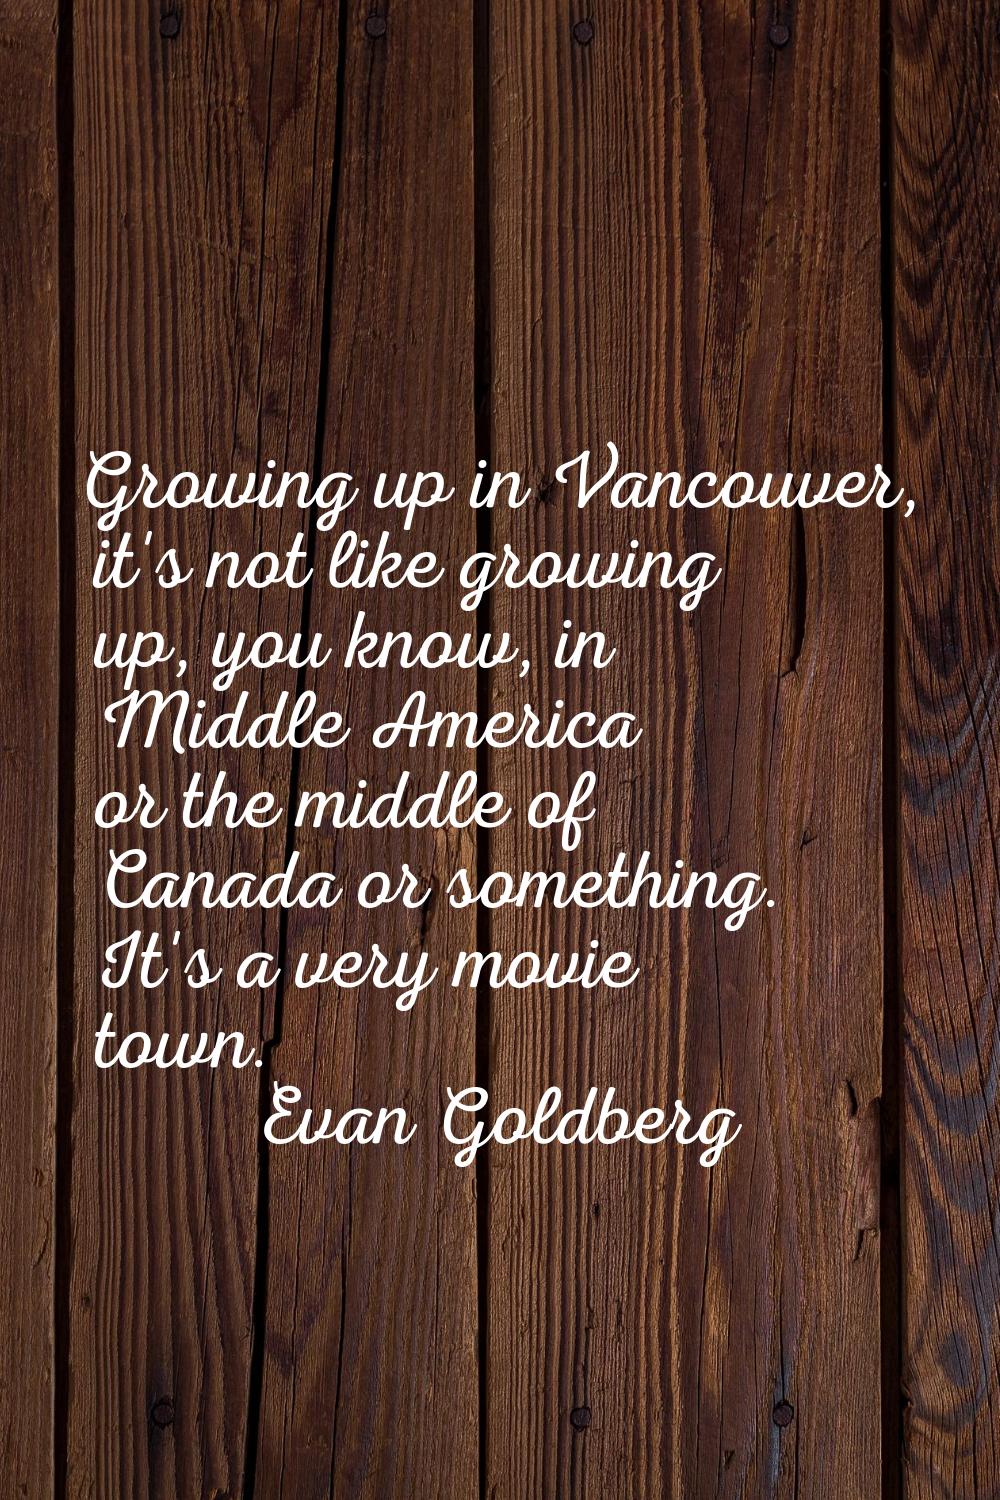 Growing up in Vancouver, it's not like growing up, you know, in Middle America or the middle of Can